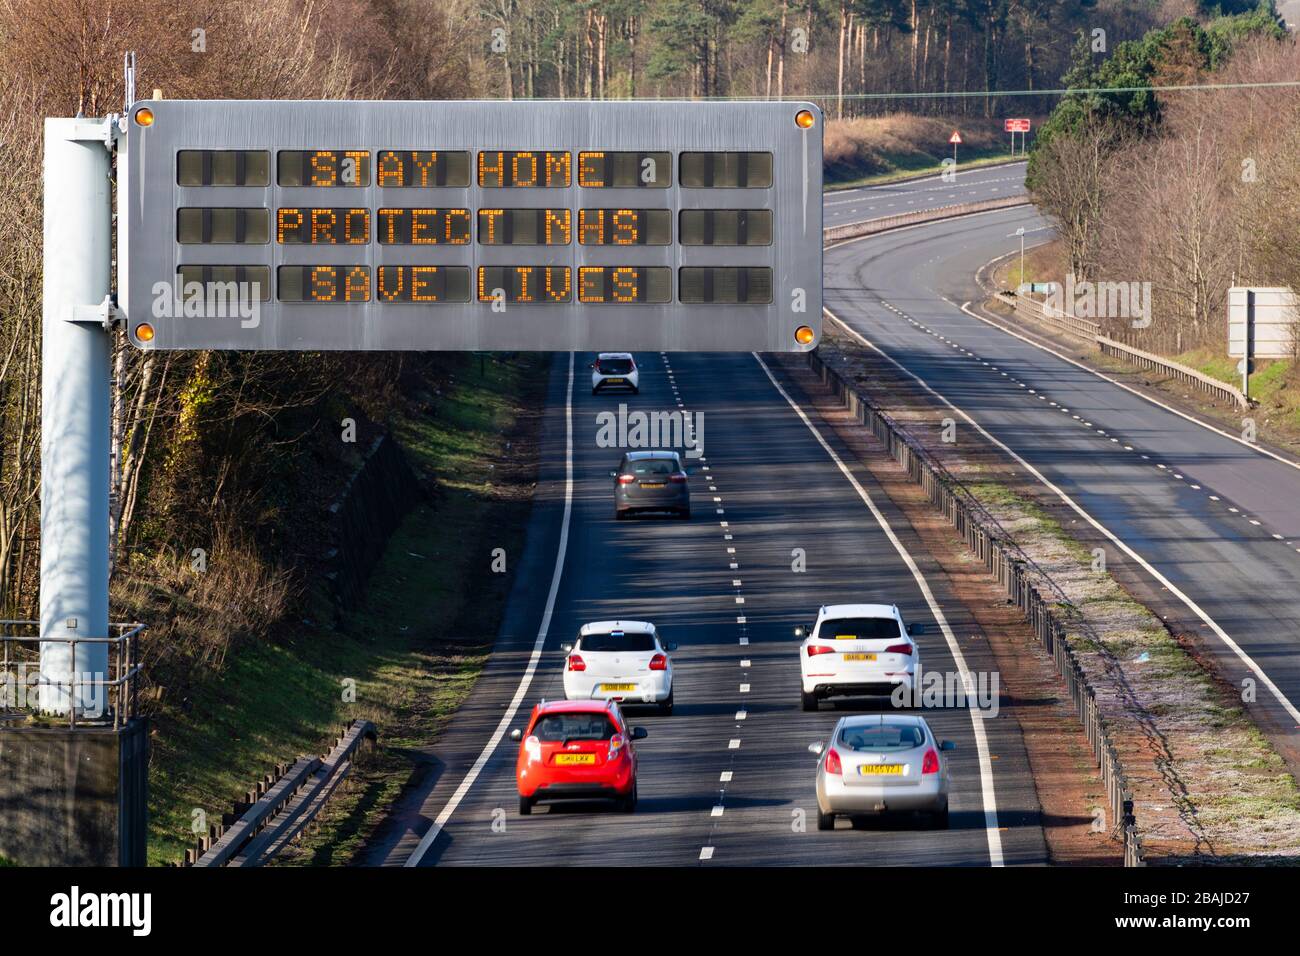 East Lothian, Scotland, UK. 28 March, 2020. Coronavirus lockdown roadside warning sign with message STAY HOME PROTECT NHS SAVE LIVES on A1 highway in East Lothian. Iain Masterton/Alamy Live News Stock Photo